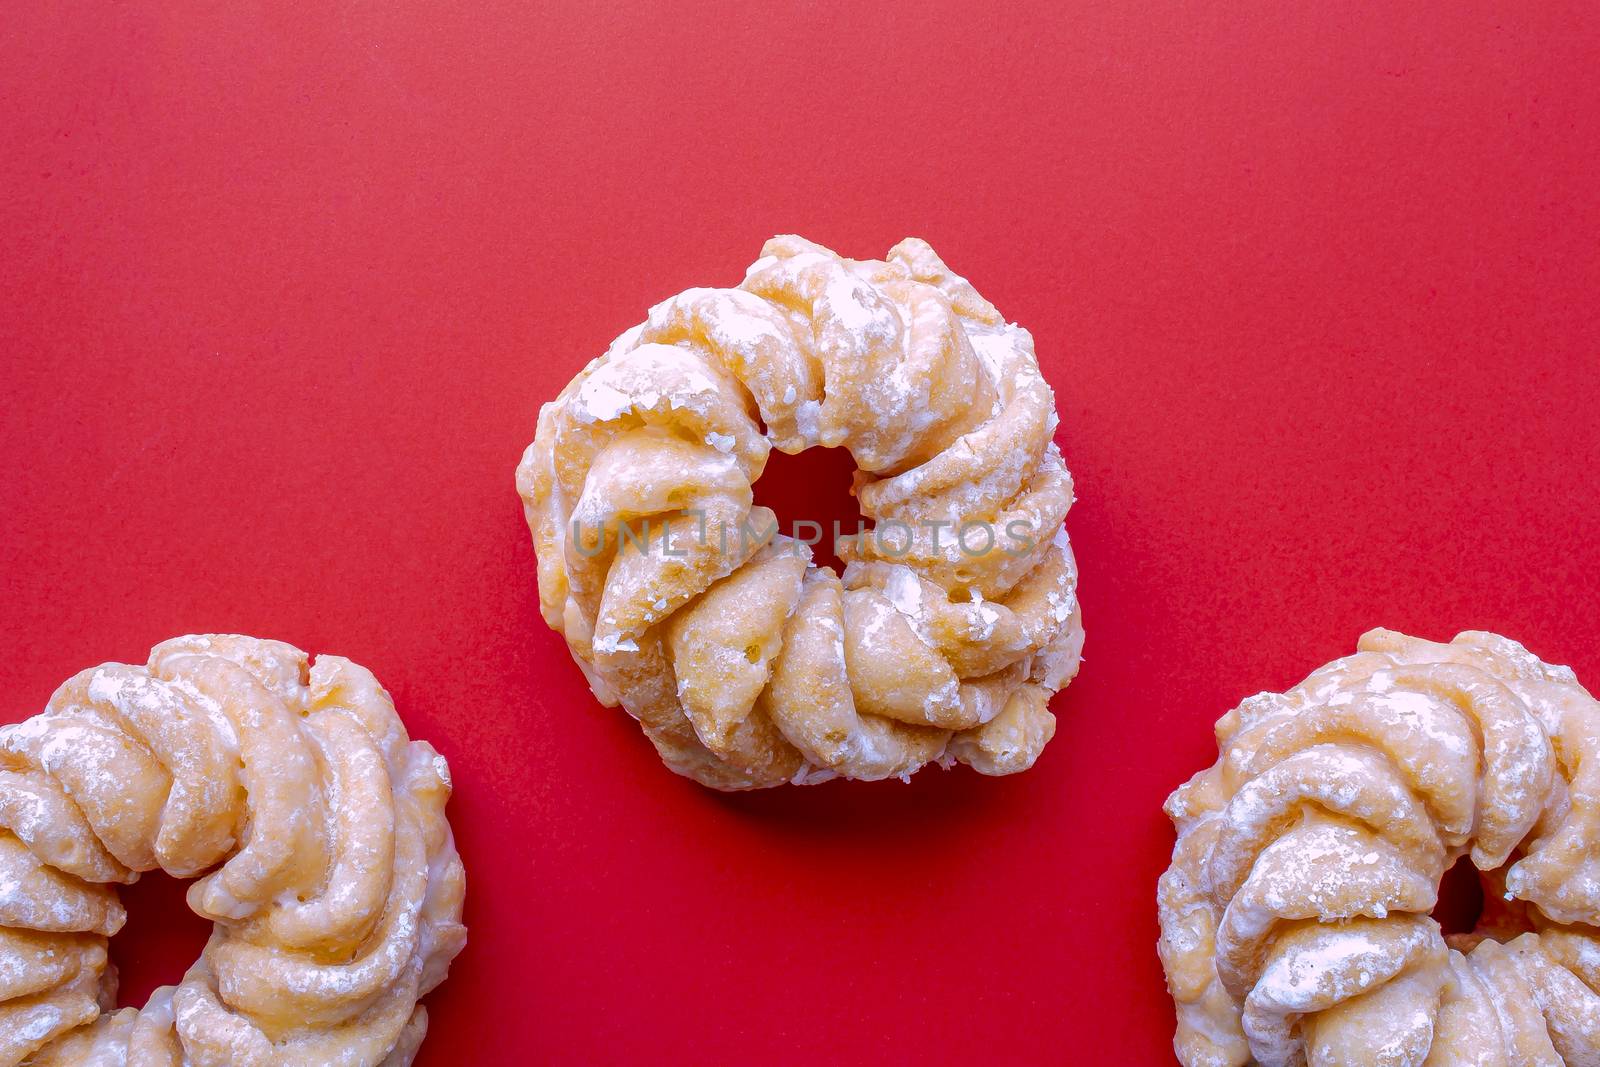 Honey Cruller Donuts on a Red Background by oasisamuel